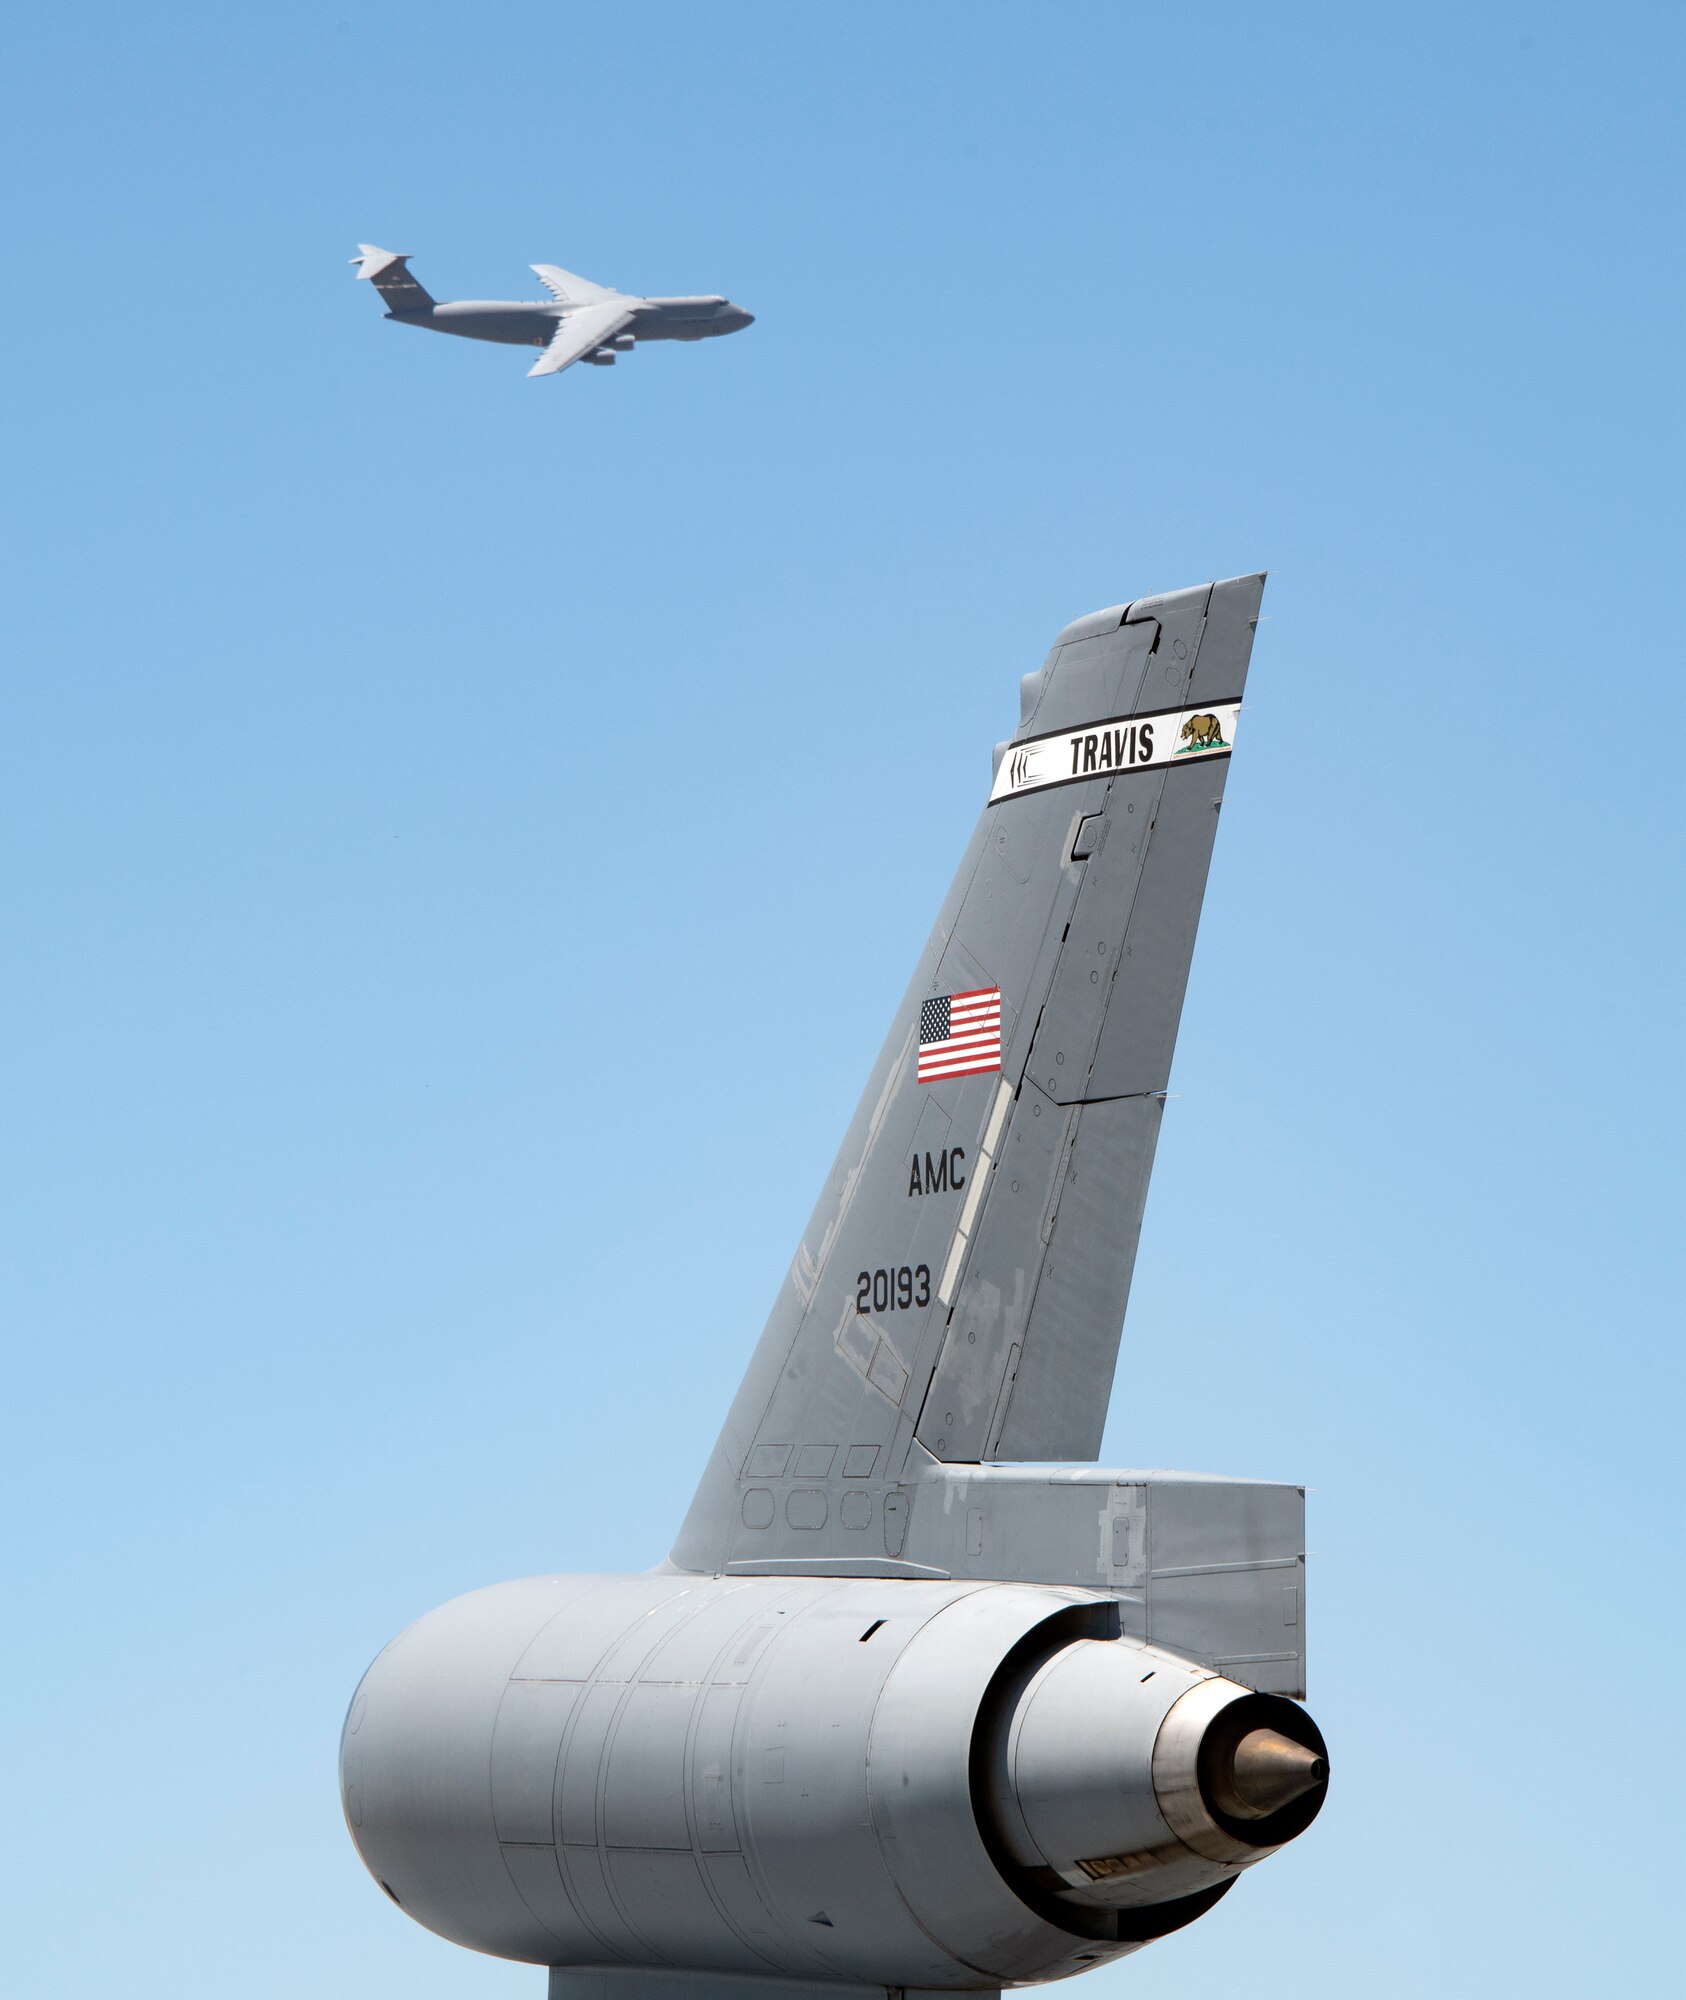 The tail of a KC-10 Extender is seen in the foreground of a departing C-5M Super Galaxy July 11, 2019, at Travis Air Force Base, California. With roughly 3,300 aircraft continuously arriving and departing on a monthly basis, Travis AFB handles more cargo and passenger traffic than any other military air terminal in the United States. (U.S. Air Force photo by Heide Couch)